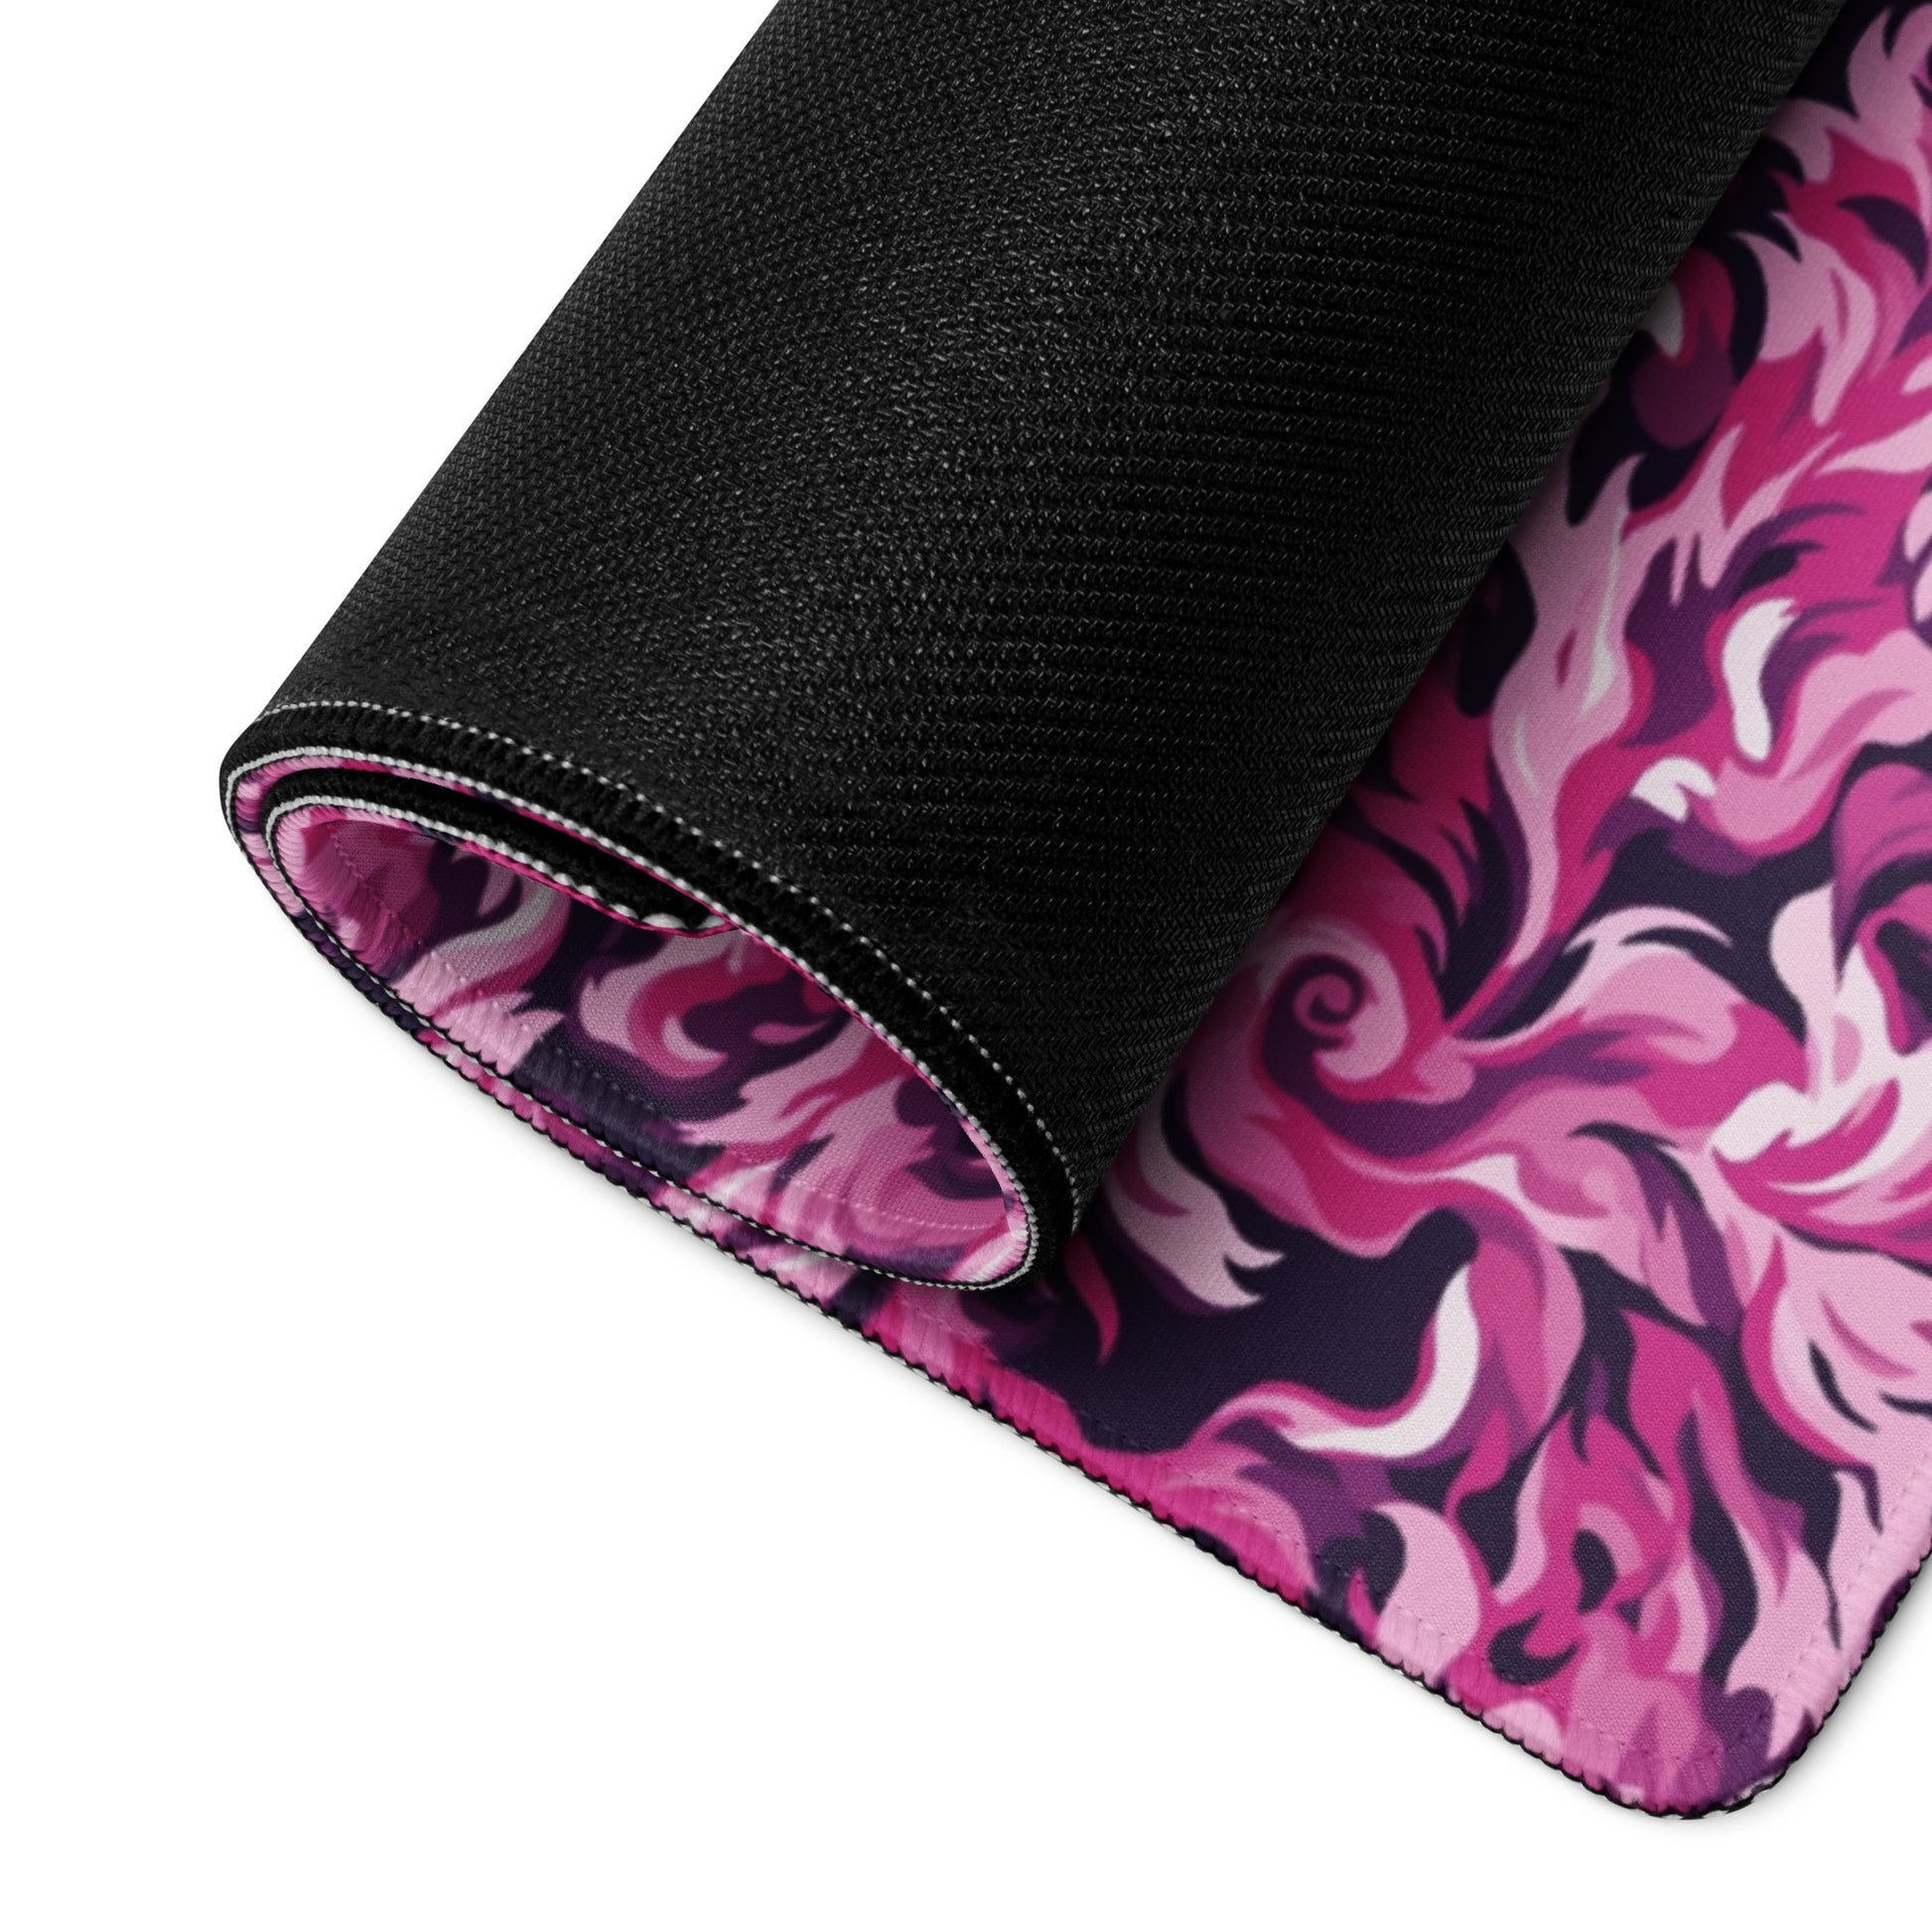 A 36" x 18" desk pad with a pink and magenta camo pattern rolled up.